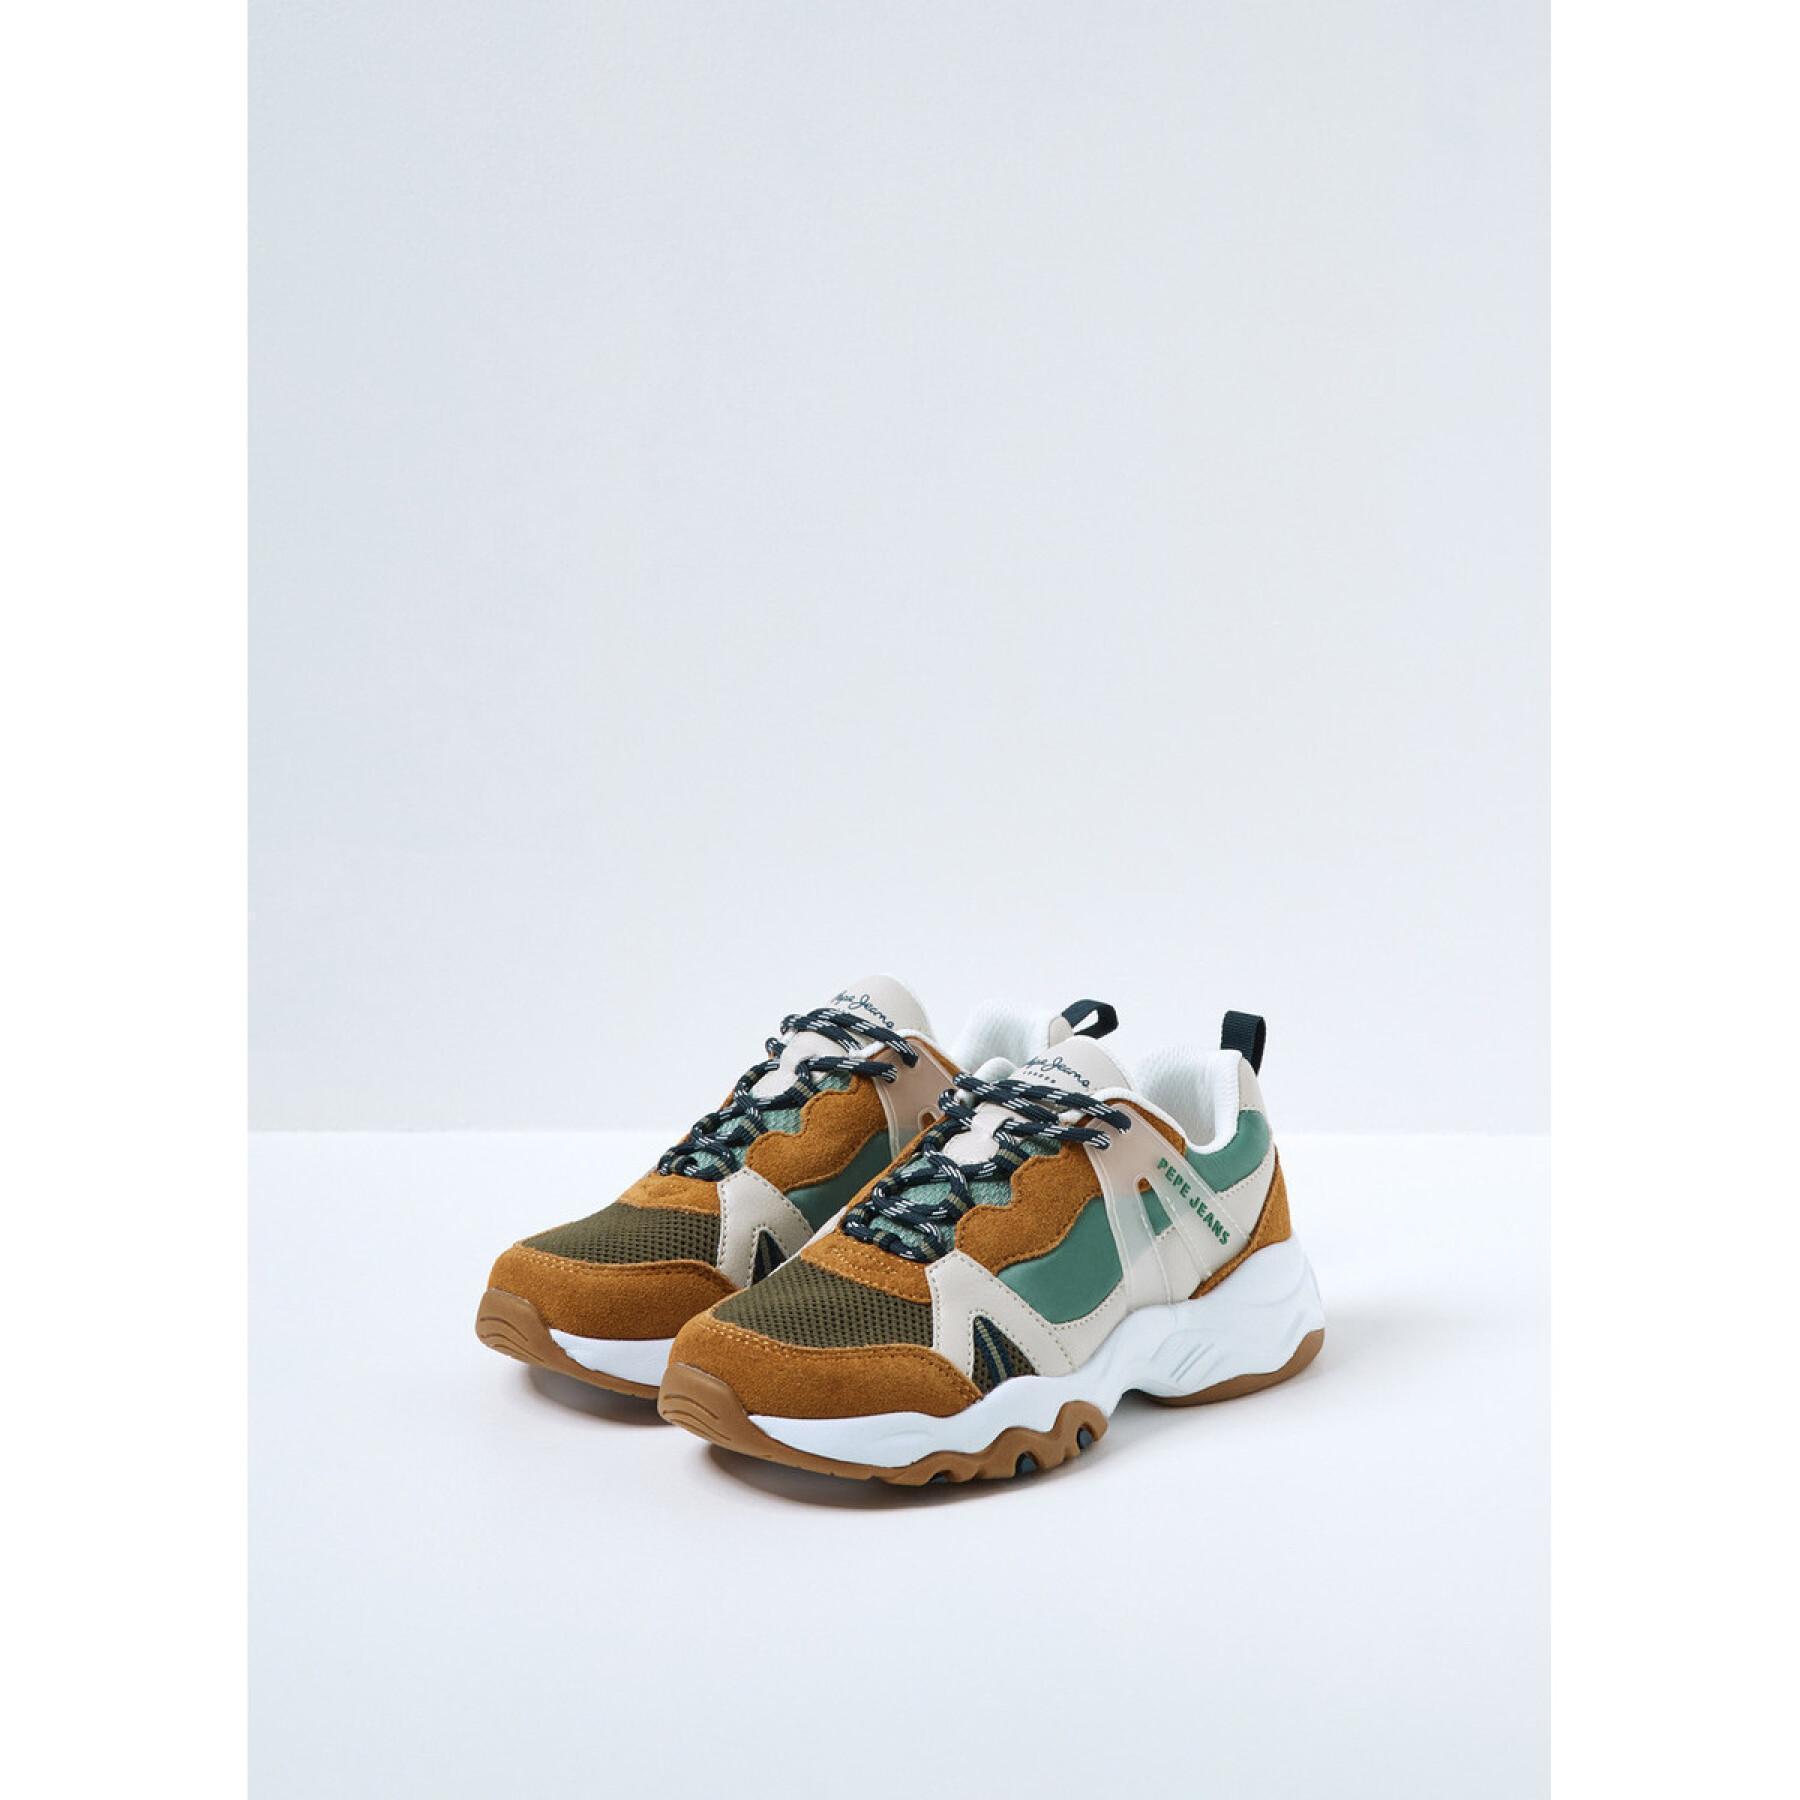 Children's sneakers Pepe Jeans Monster Track